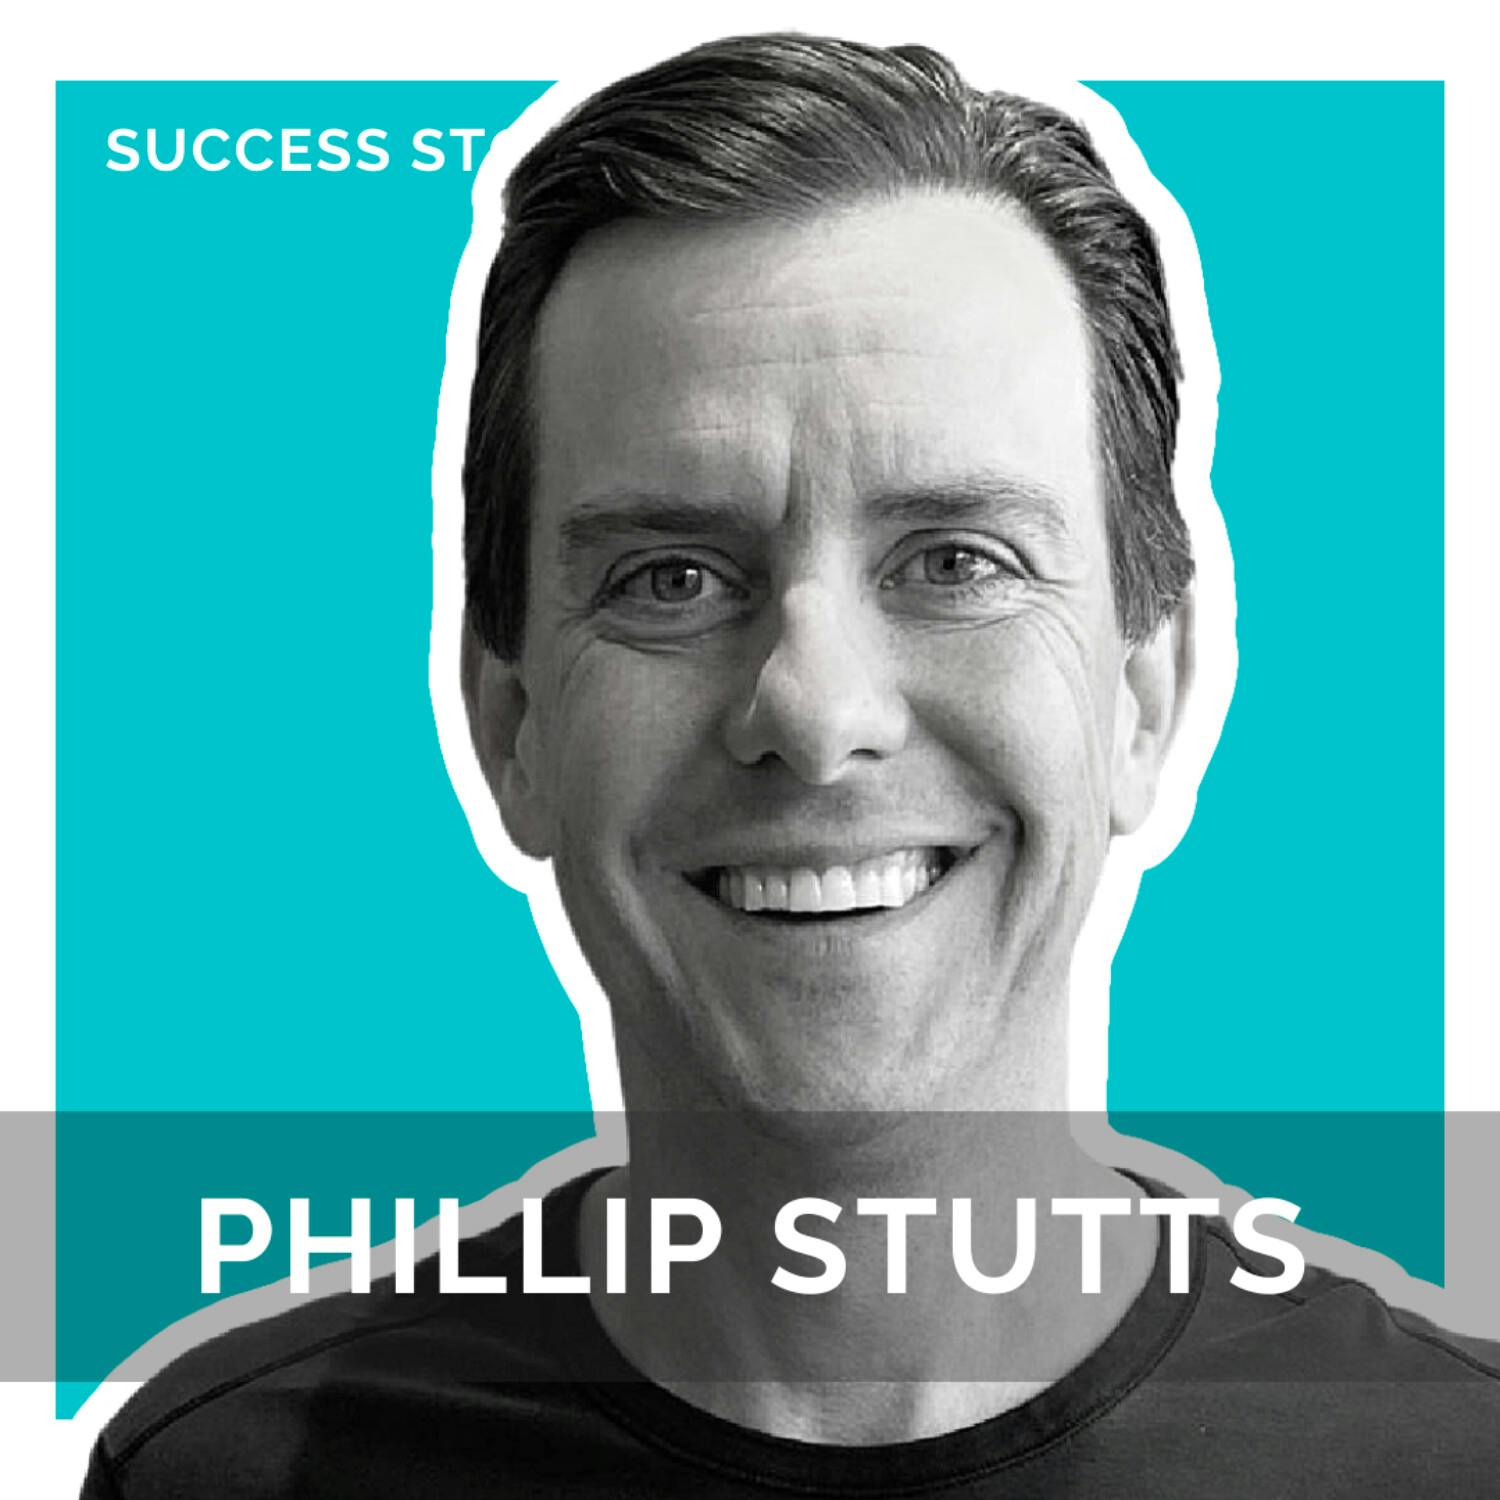 Phillip Stutts, CEO of Win BIG Media | How to Get 3 Presidents Elected Into Office (Marketing Lessons Learnt)